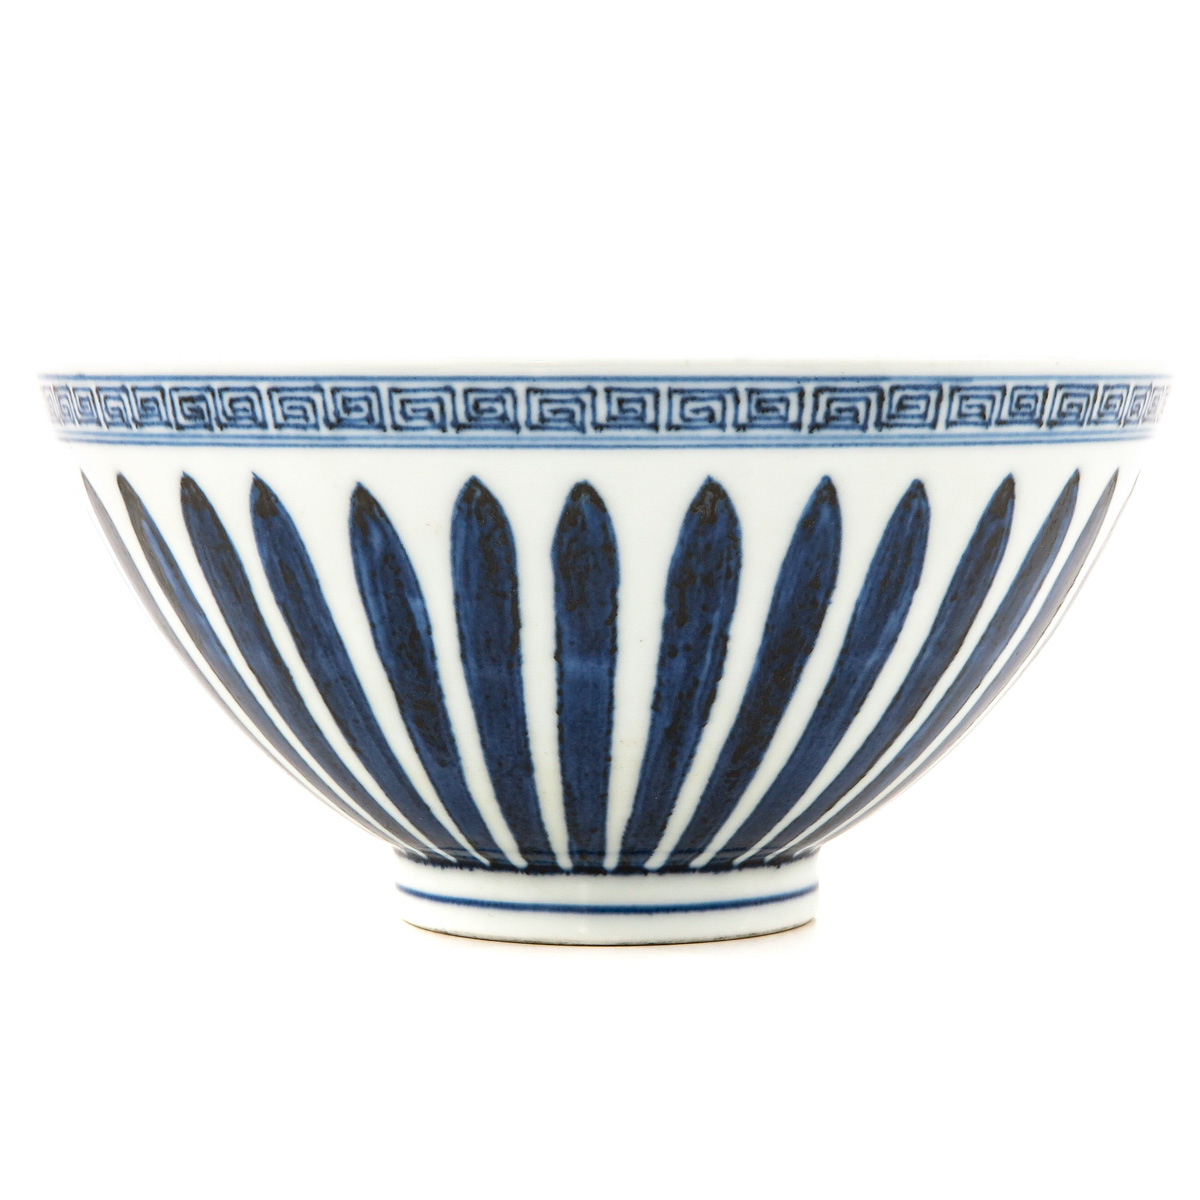 A Blue and White Bowl - Image 2 of 10